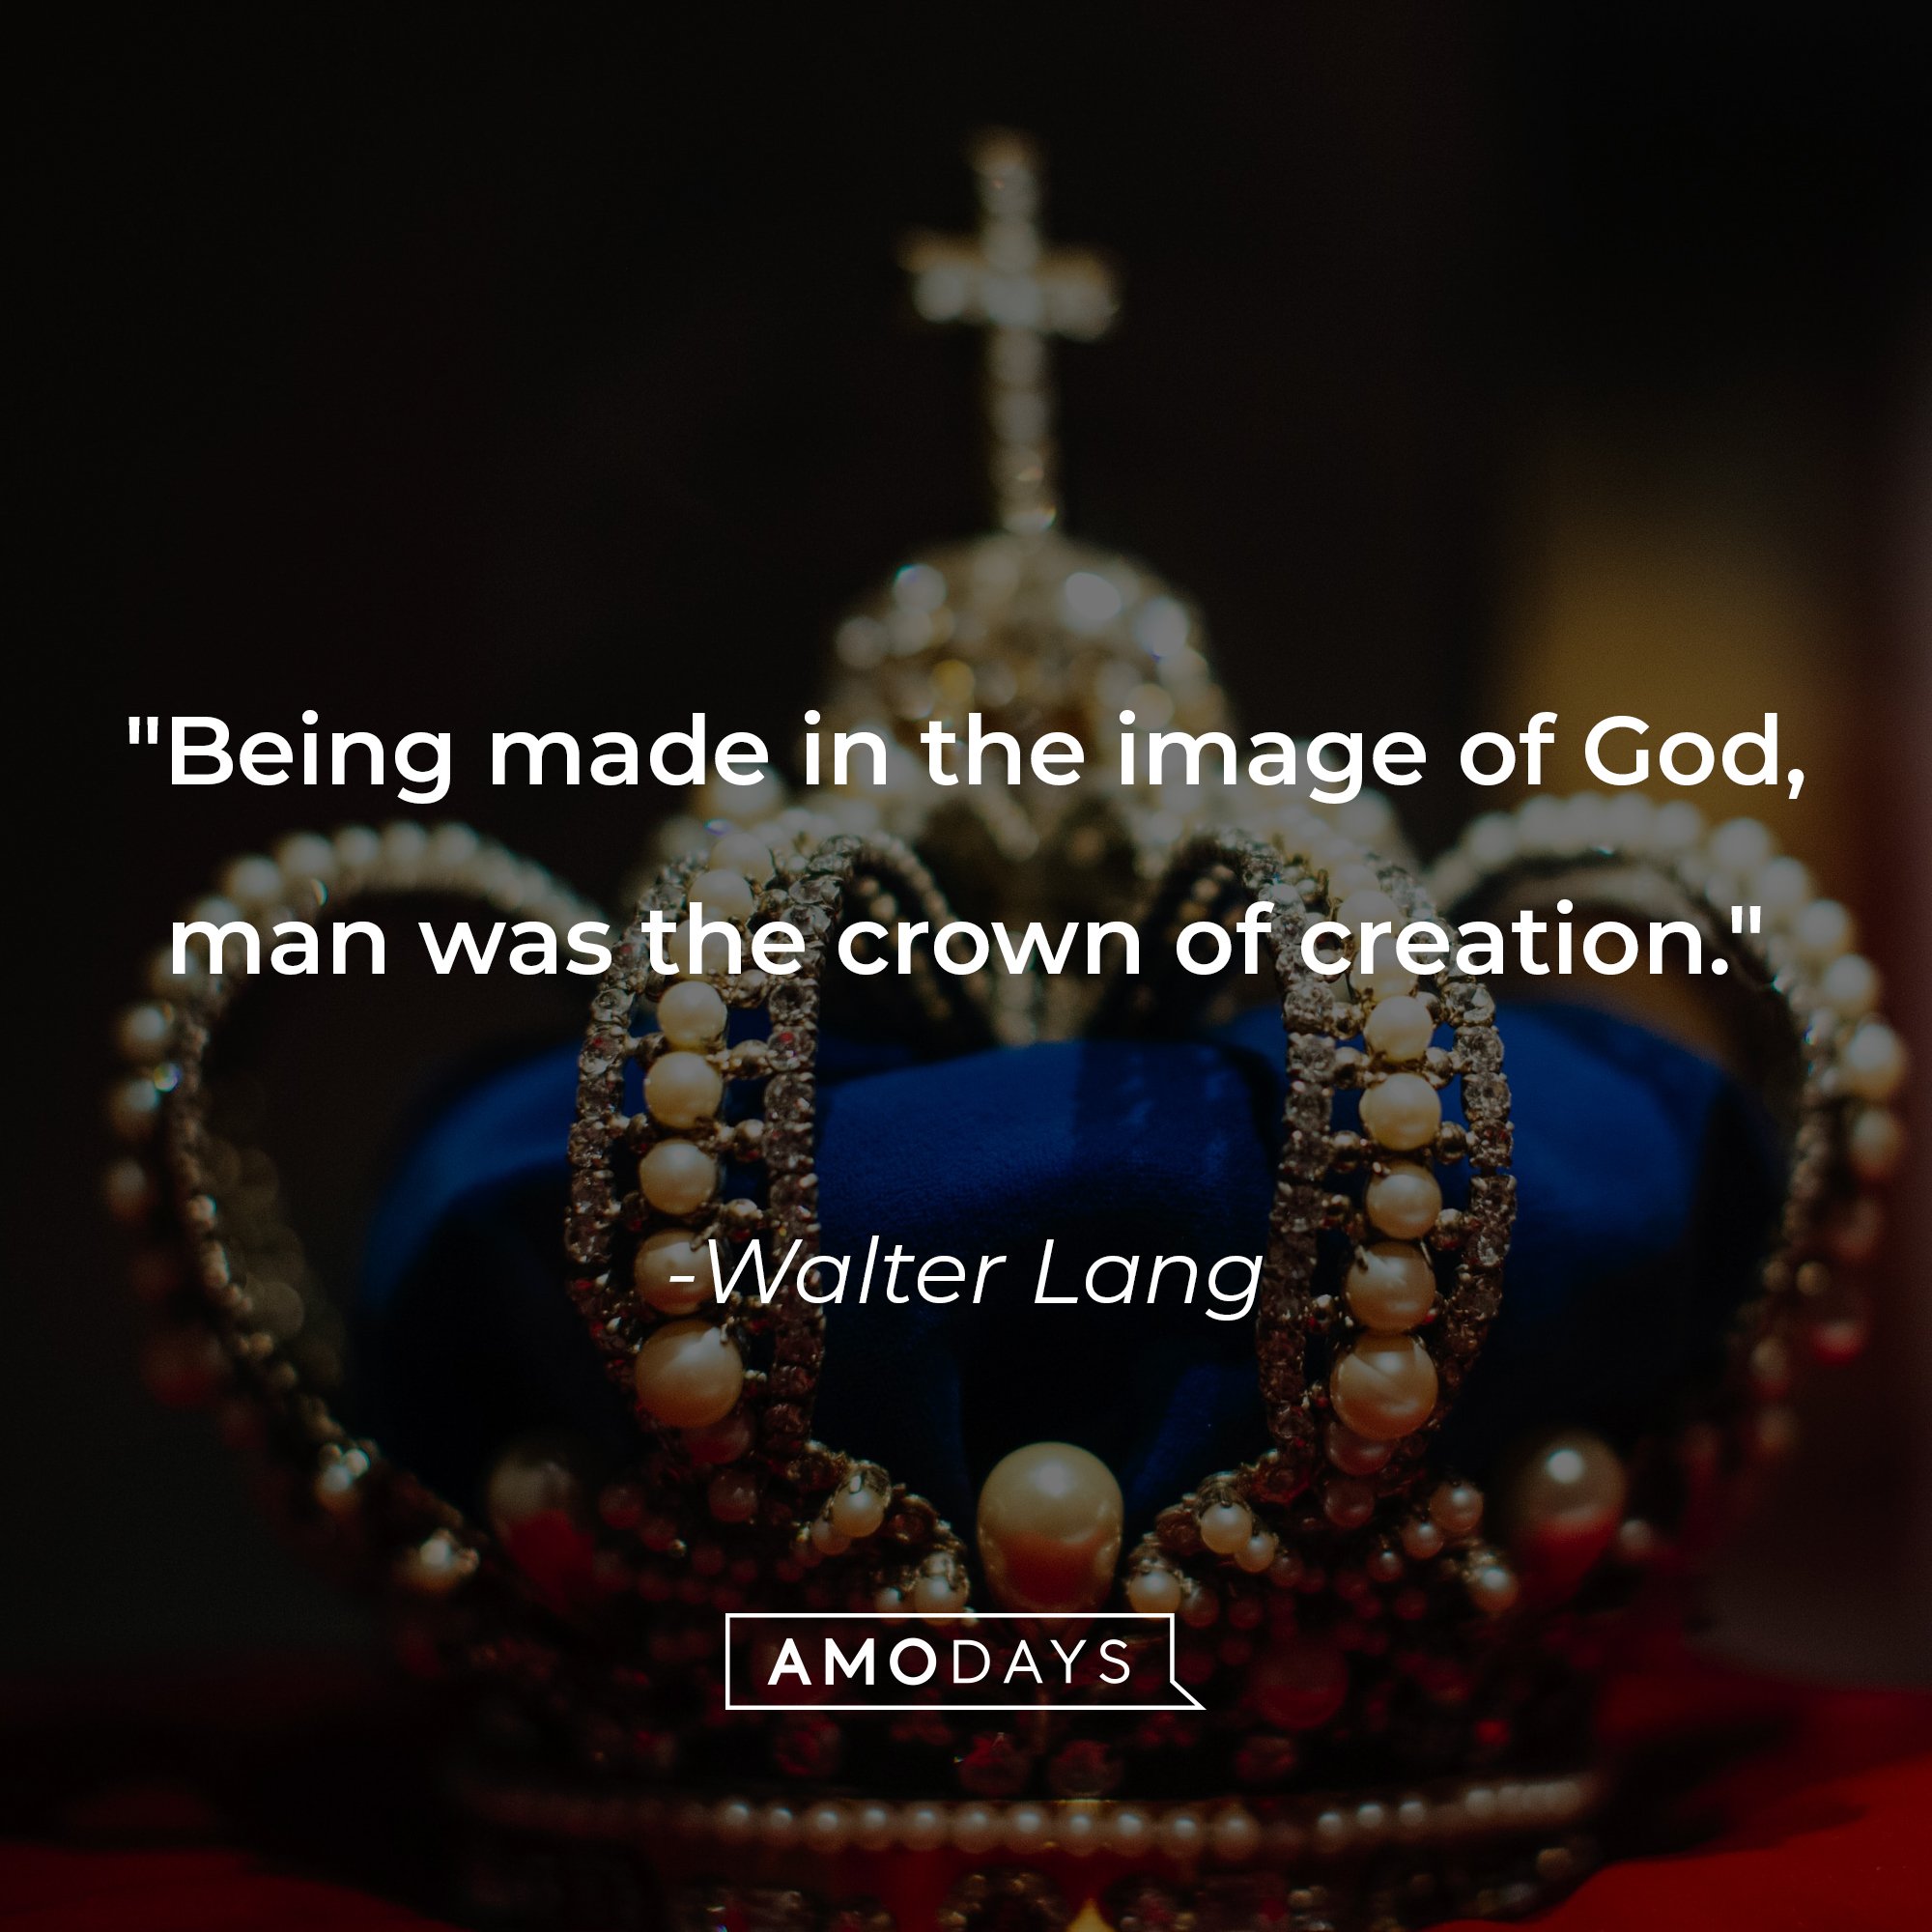 Walter Lang's quote: "Being made in the image of God, man was the crown of creation." | Image: AmoDays